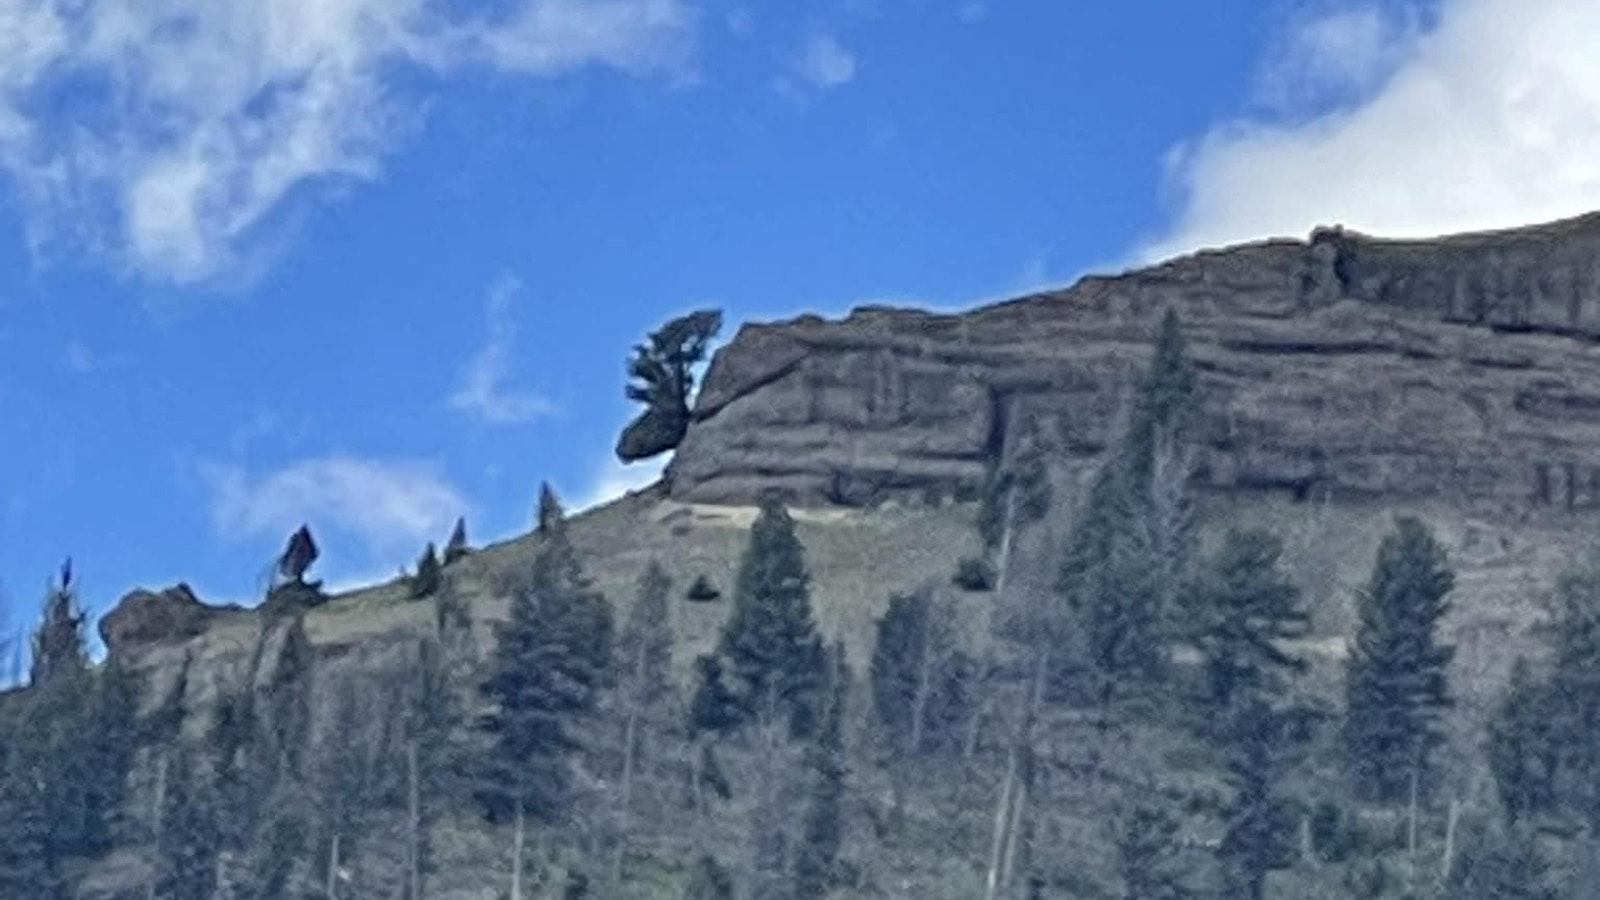 This tree growing from a rock face on a ridge in Yellowstone National Park’s Lamar Valley resembles a moose head. But folks have to know just where to look to see it.